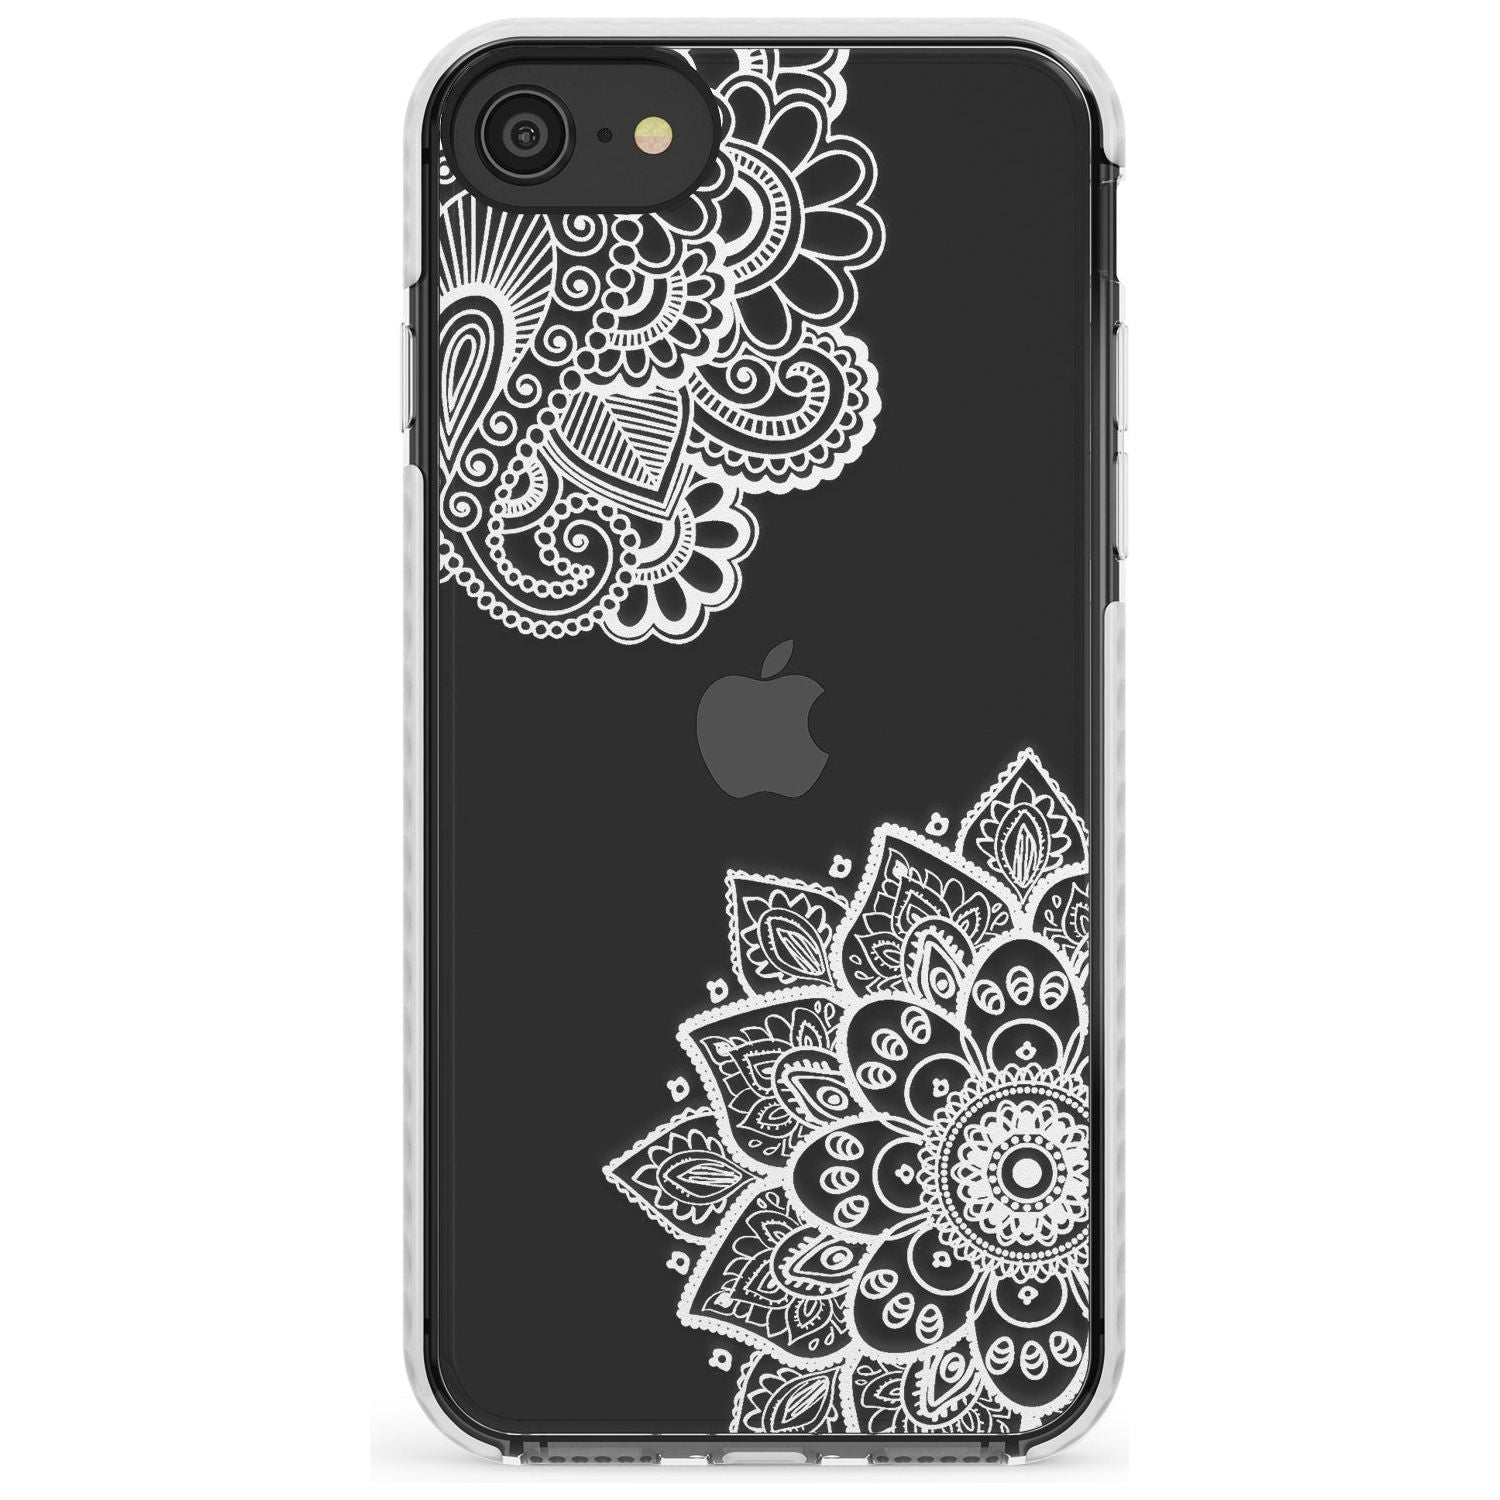 White Henna Florals Impact Phone Case for iPhone SE 8 7 Plus